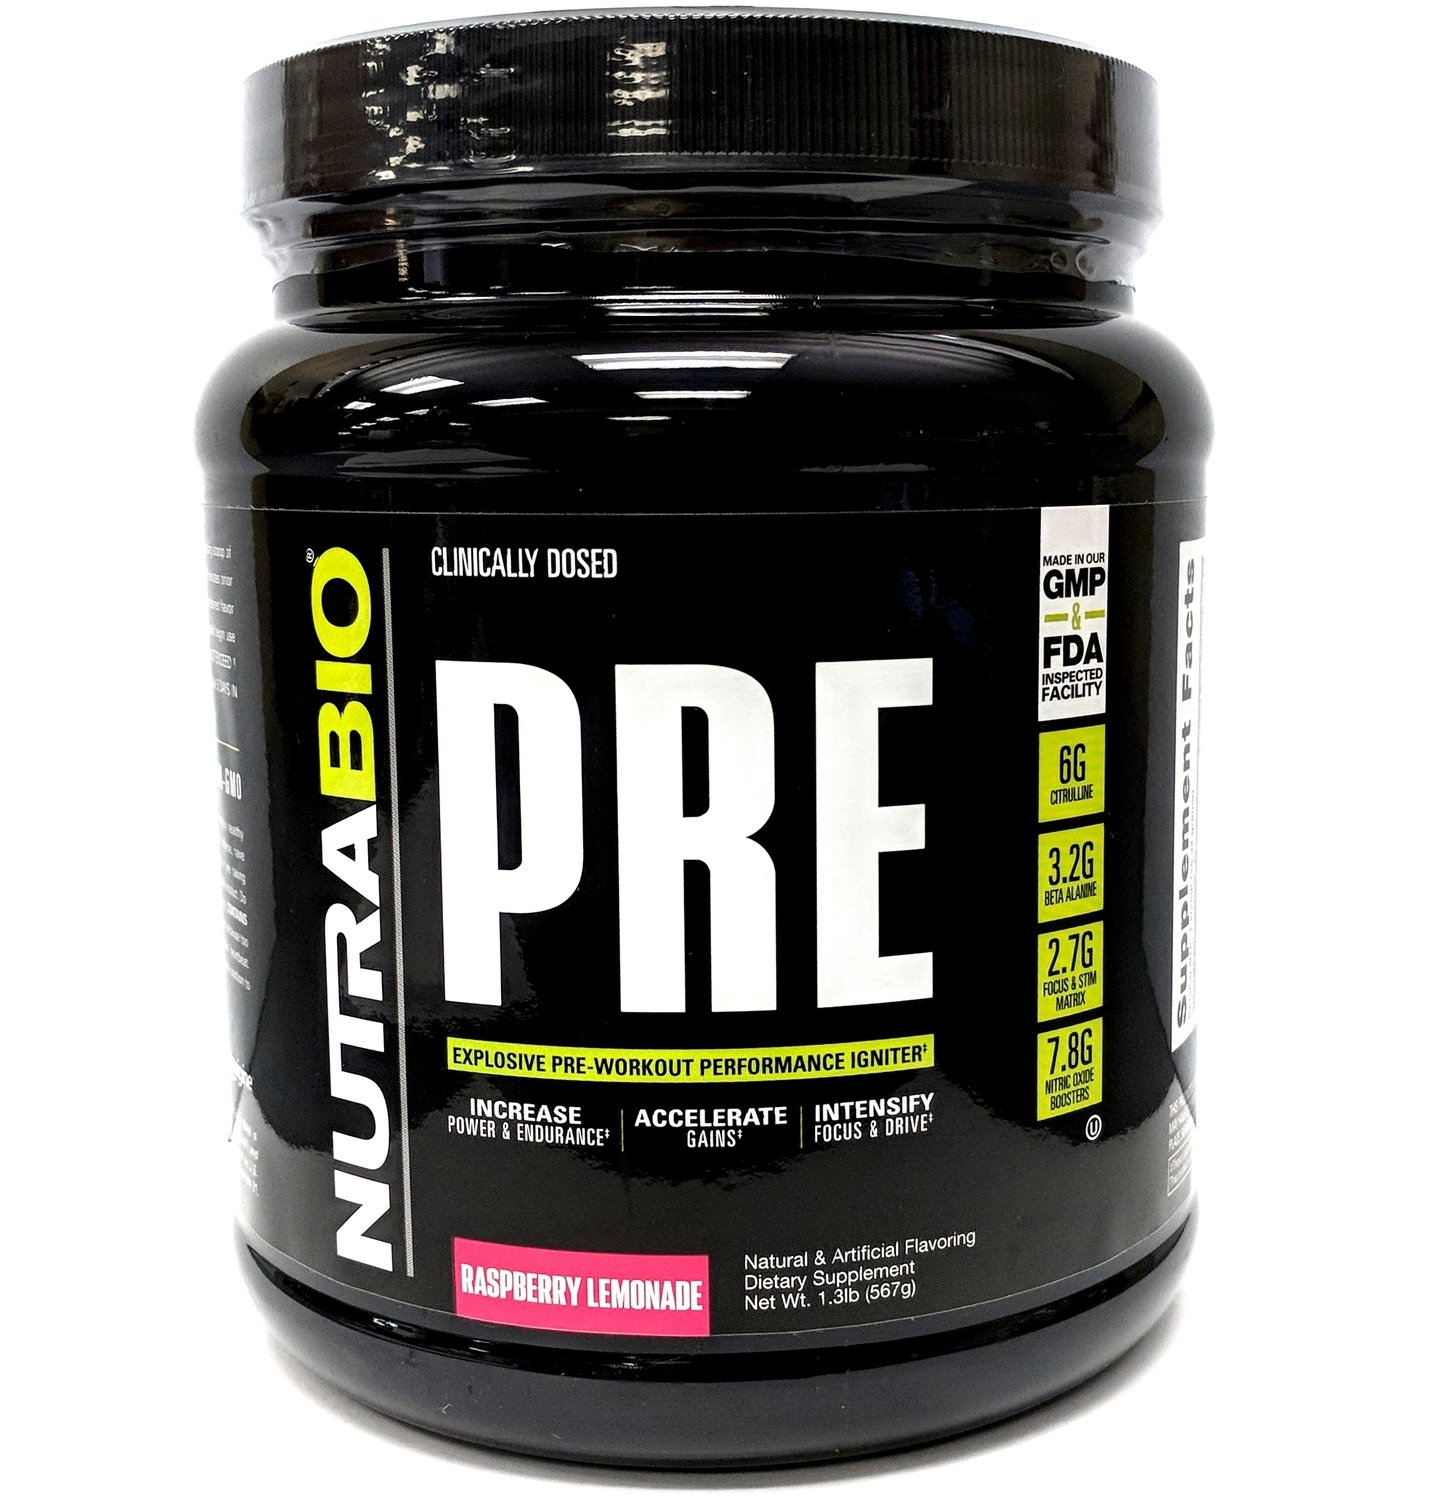 15 Minute Nutrabio Pre Workout for Build Muscle